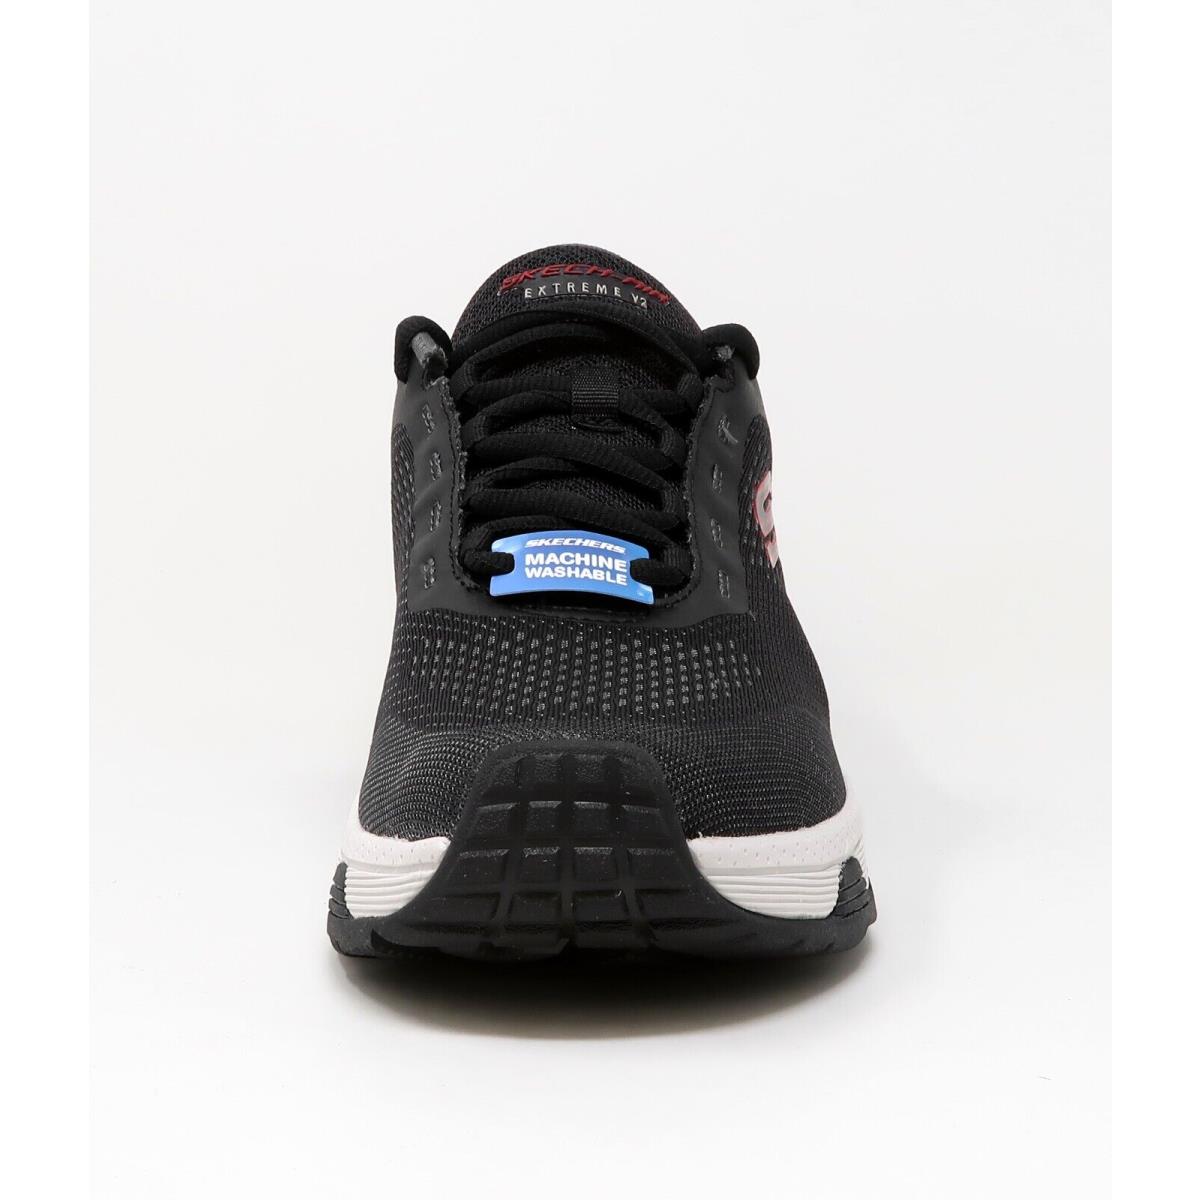 Skechers shoes Extreme - Black 3